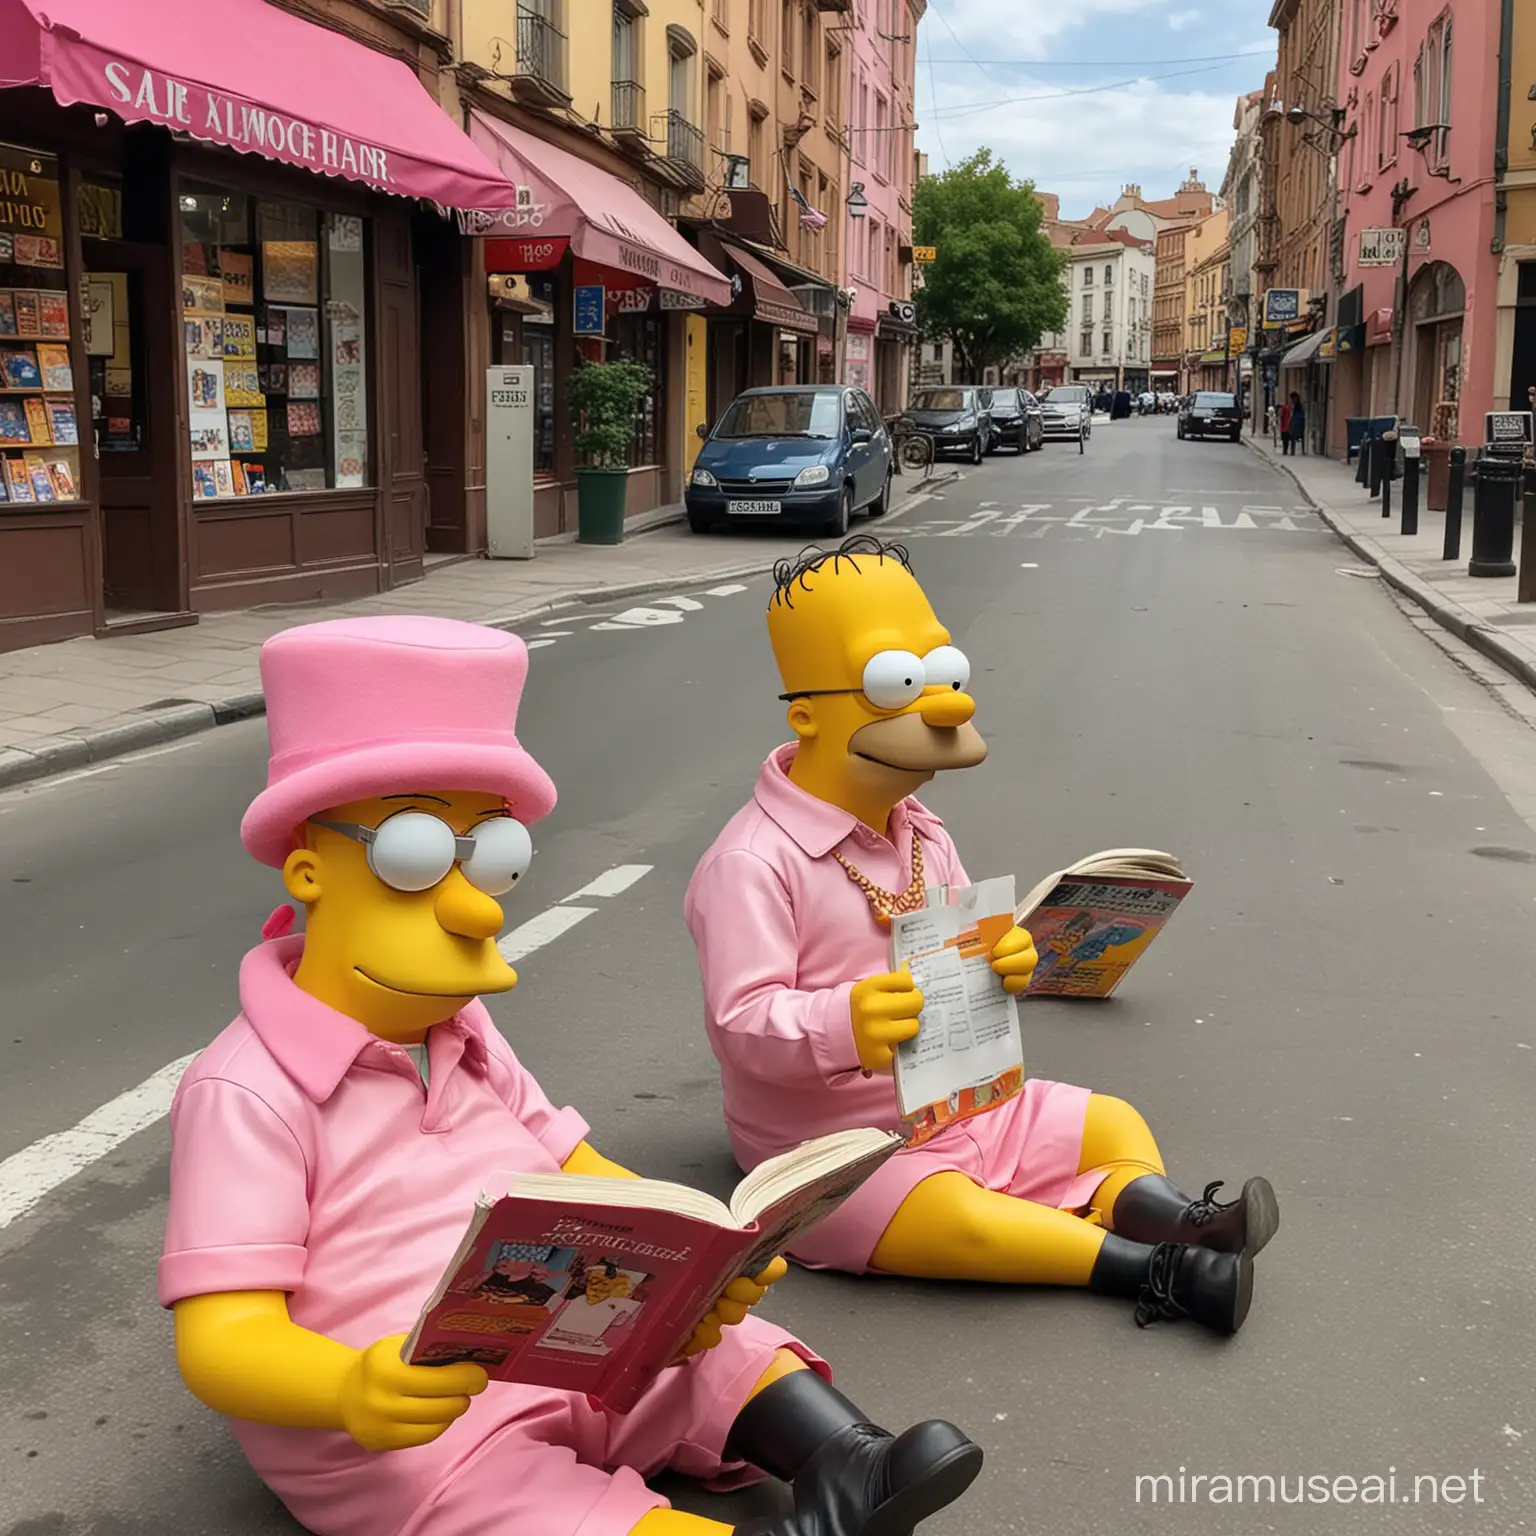 The Simpsons and the Pink Panther are reading on the street